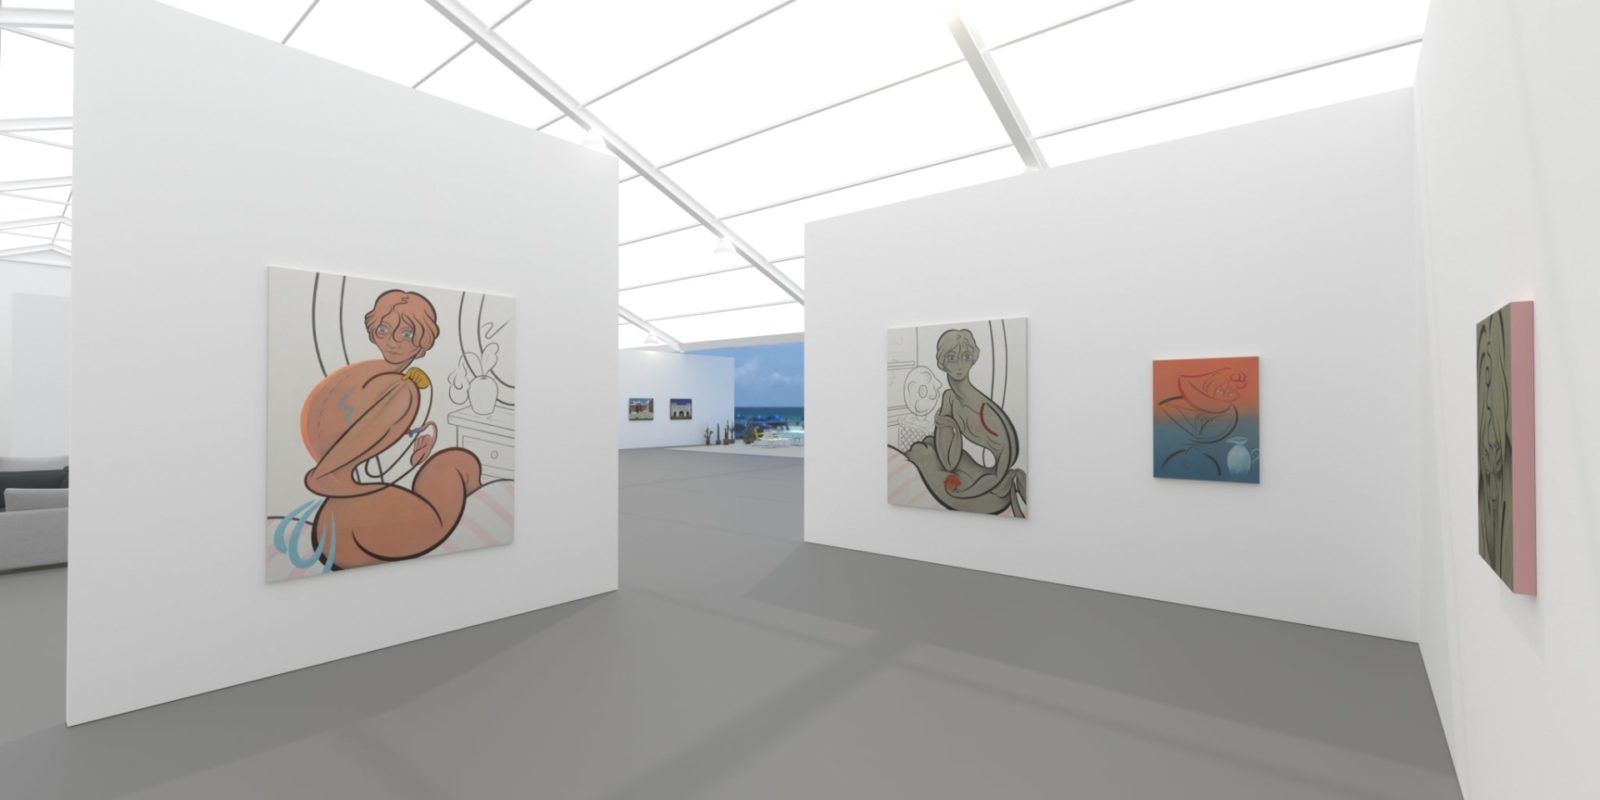 Welcome to the world’s first virtual reality art fair